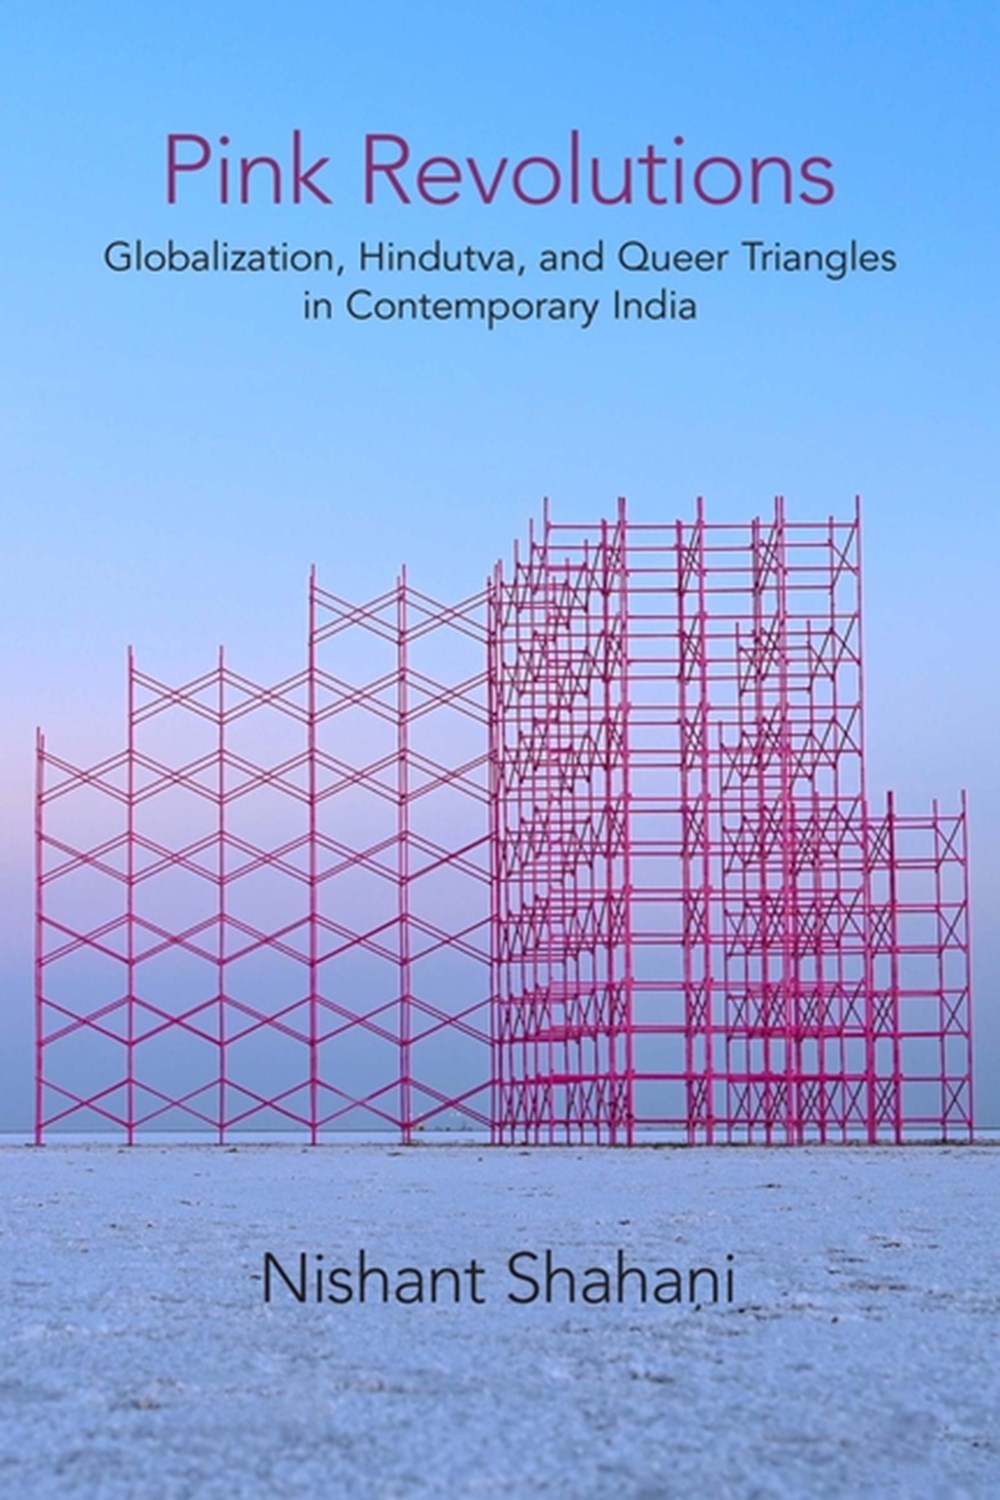 Pink Revolutions Globalization, Hindutva, and Queer Triangles in Contemporary India